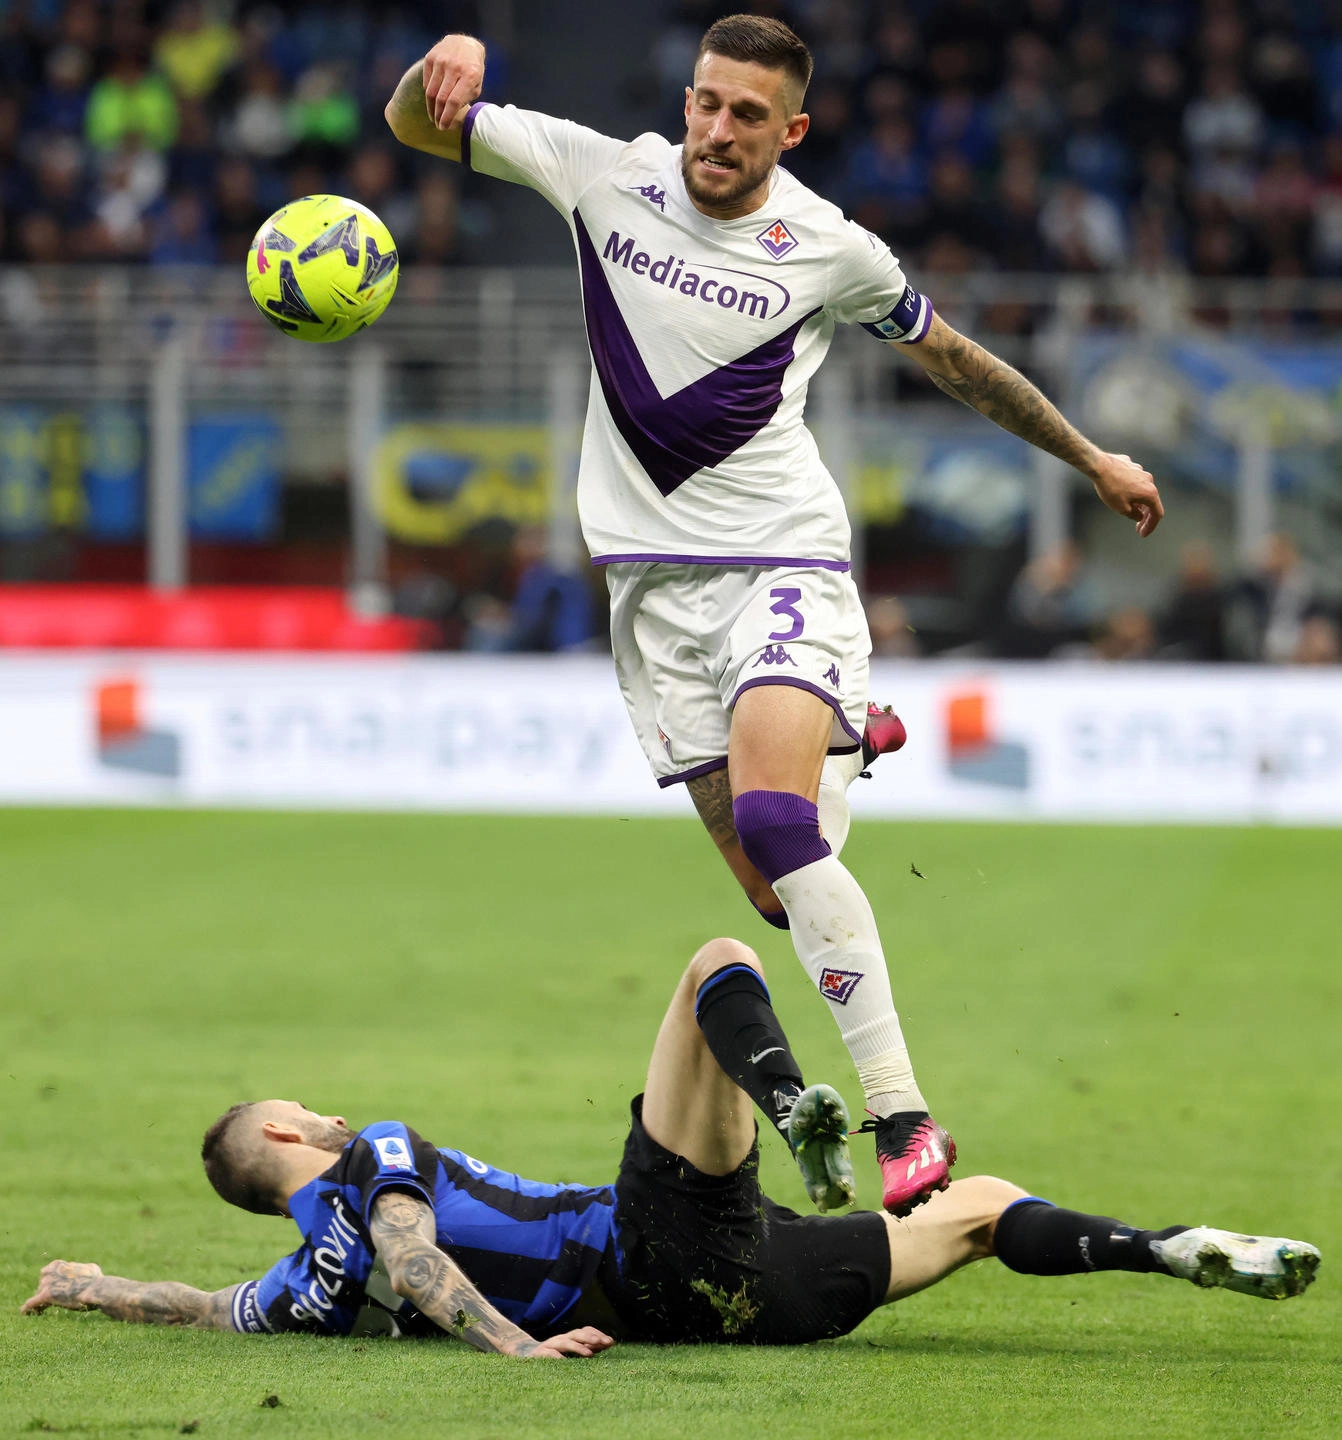 Inter Milan�s Marcelo Brozovic (L) challenges for the ball  Fiorentina�s Cristiano Biraghi during the Italian serie A soccer match between Fc Inter  and Fiorentina Giuseppe Meazza stadium in Milan, 1 April  2023.ANSA / MATTEO BAZZI